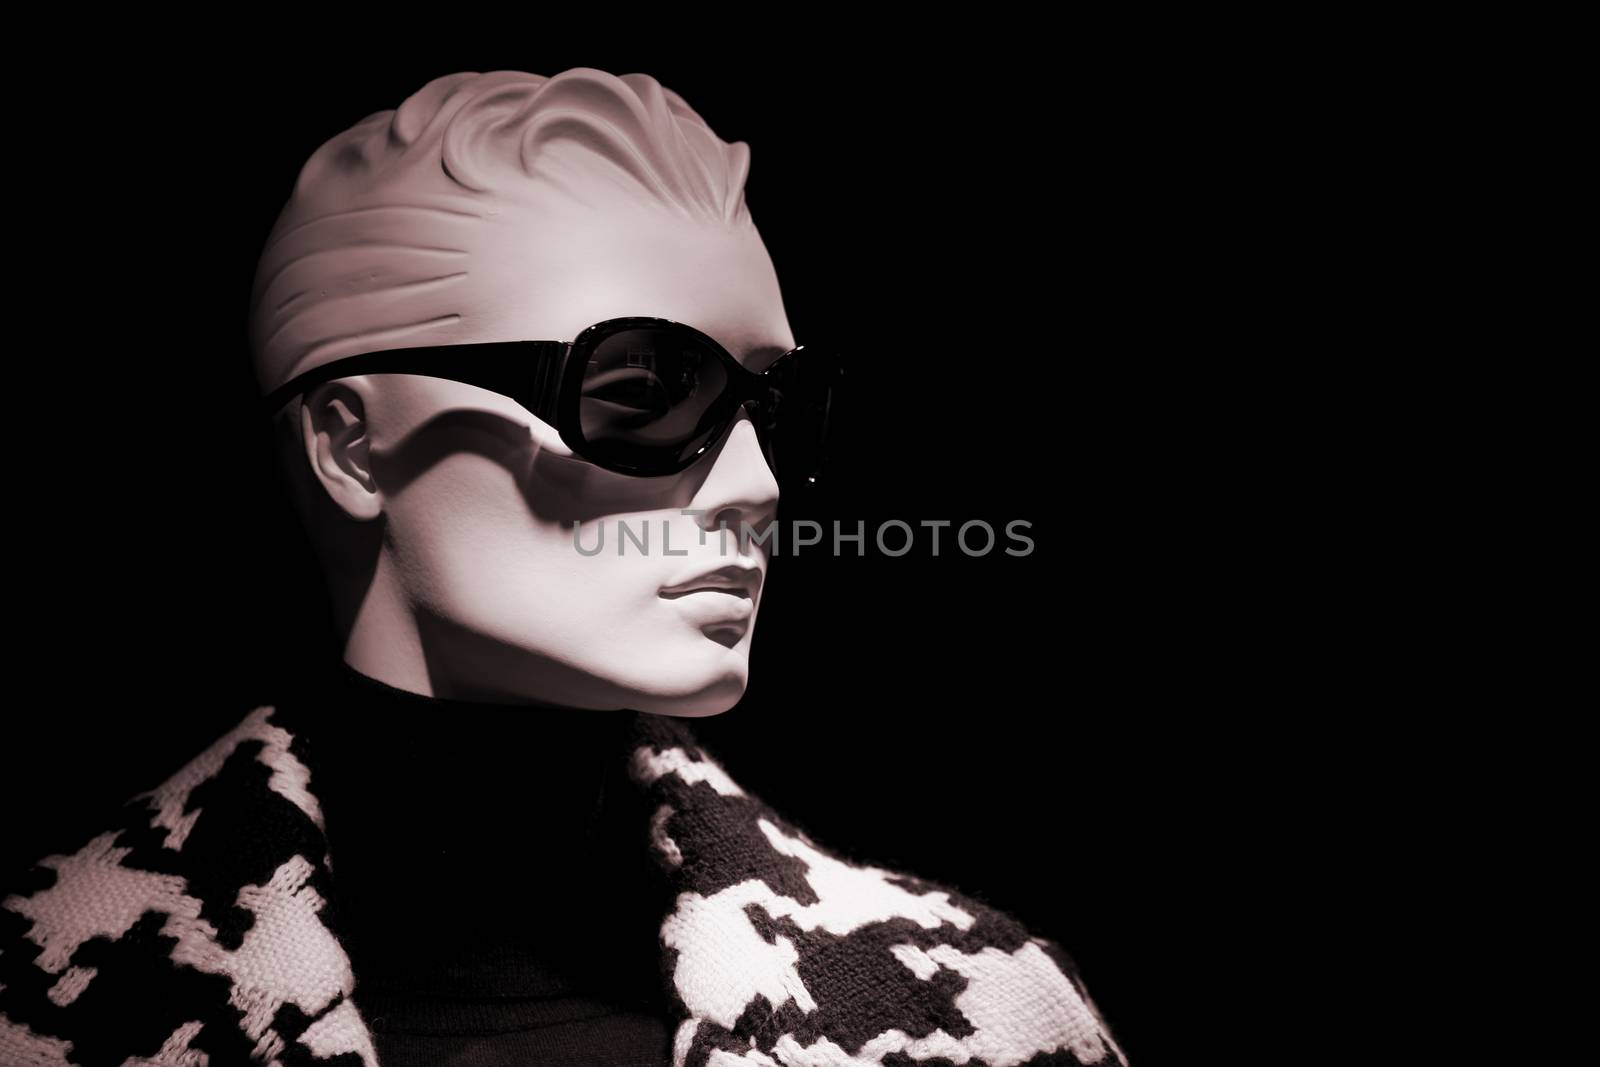 Shop dummy store mannequin female head with plastic hair wearing sunglasses on plain black background. 